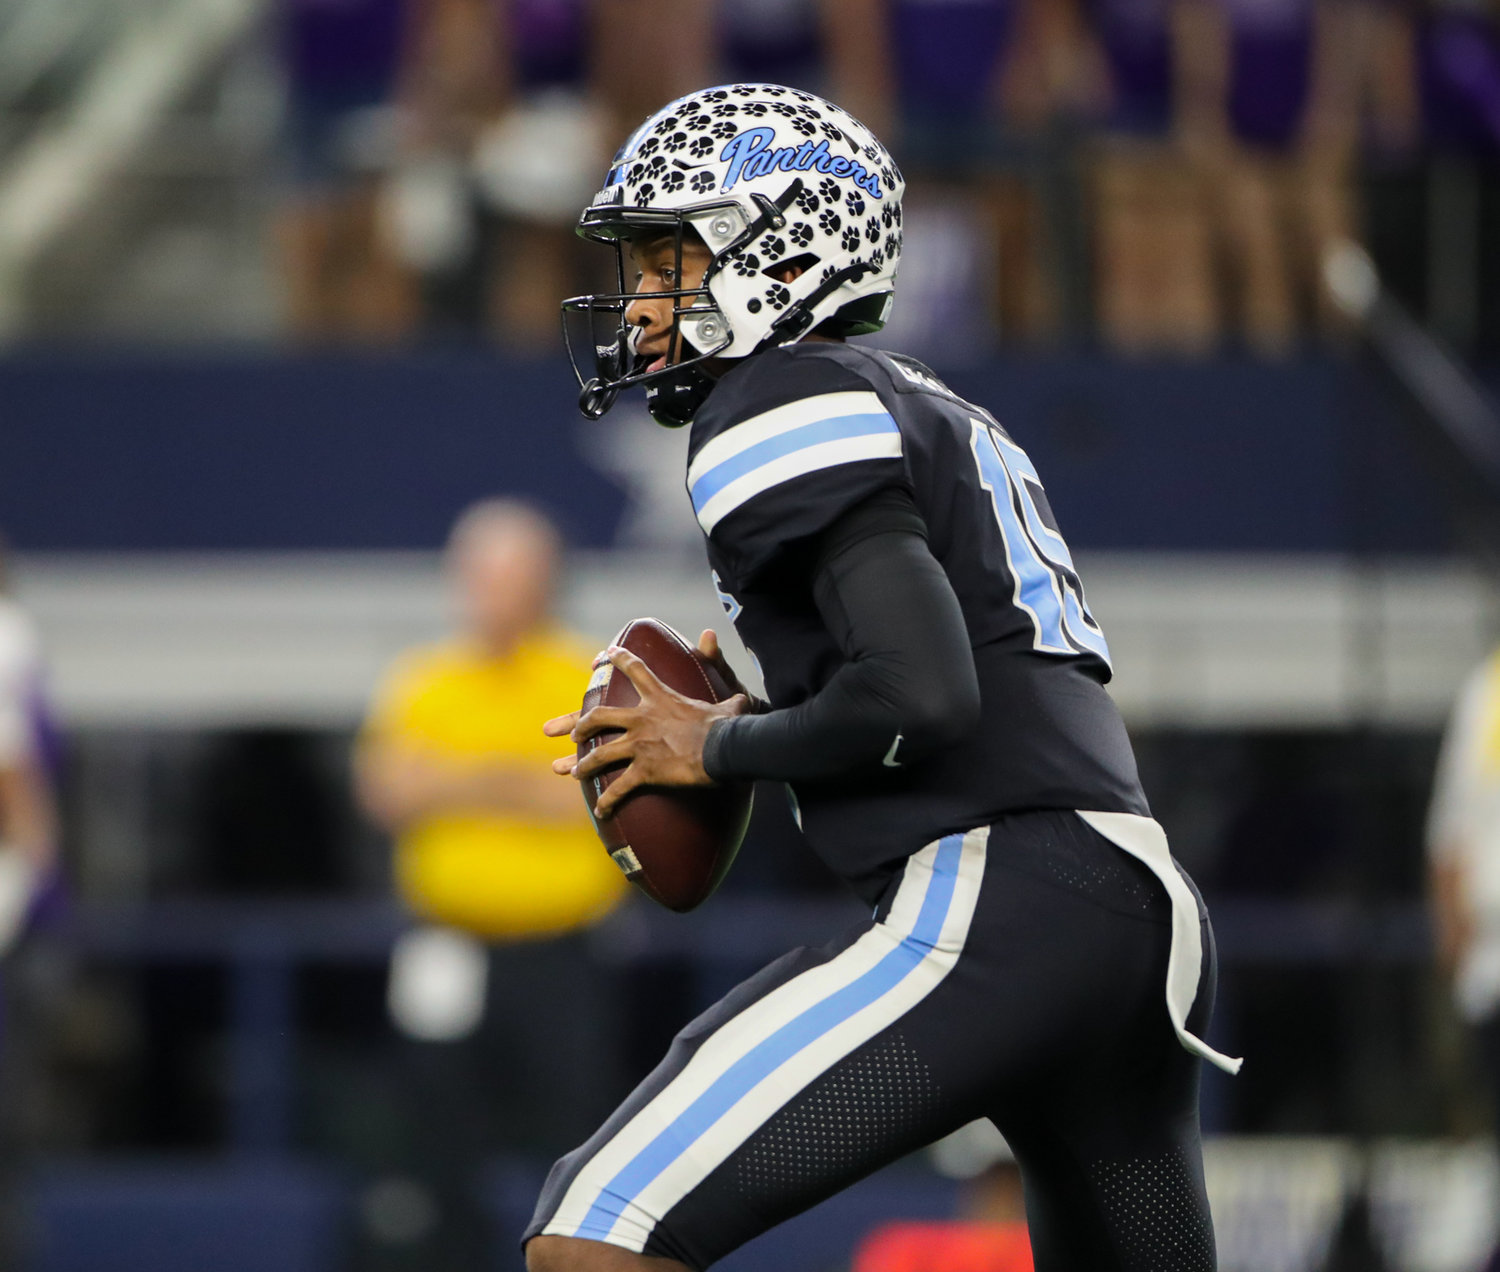 Paetow Panthers quarterback C.J. Dumas Jr. (15) looks to pass during the Class 5A Division I state football championship game between Paetow and College Station on December 17, 2021 in Arlington, Texas.